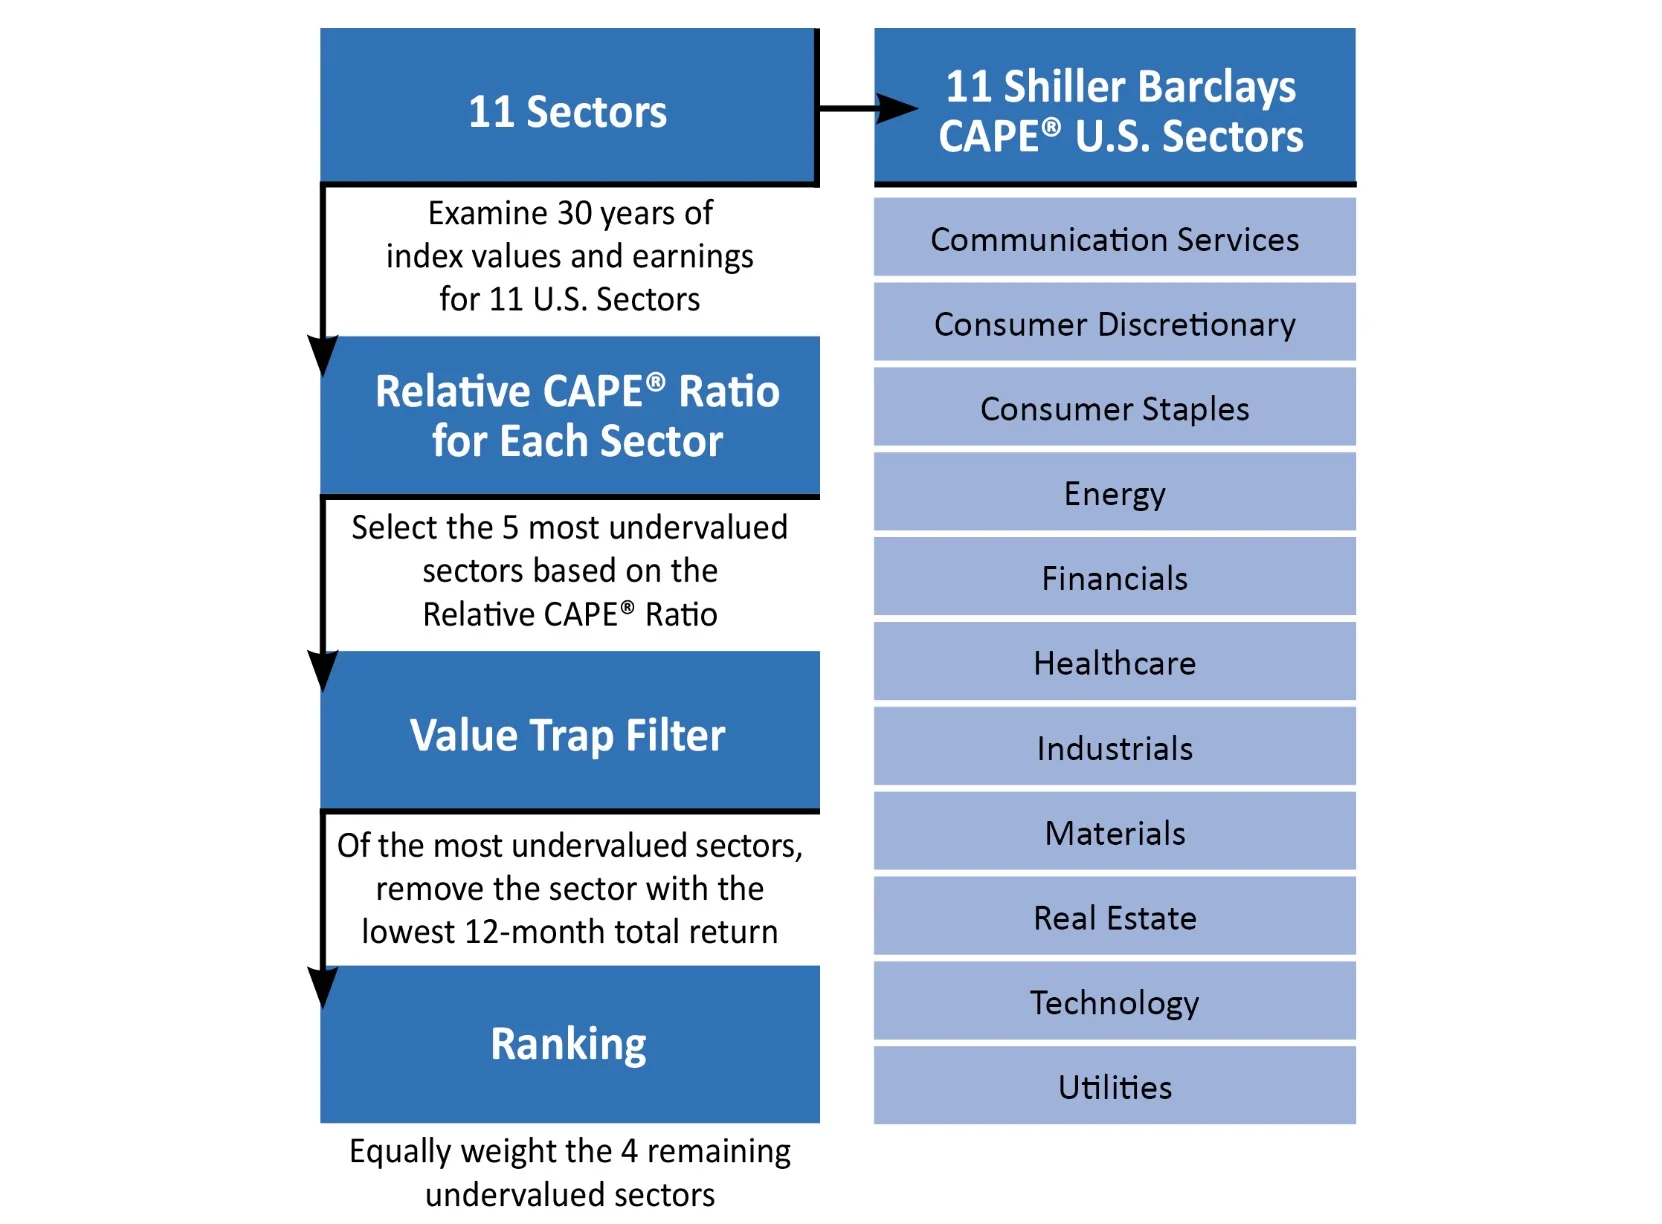 11 Shiller Barclays CAPE US Sectors examining 30 years of index values to find the 5 most undervalued sectors by Relative CAPE Ratio and then remove the value trap to select the 4 remaining equal weighted 